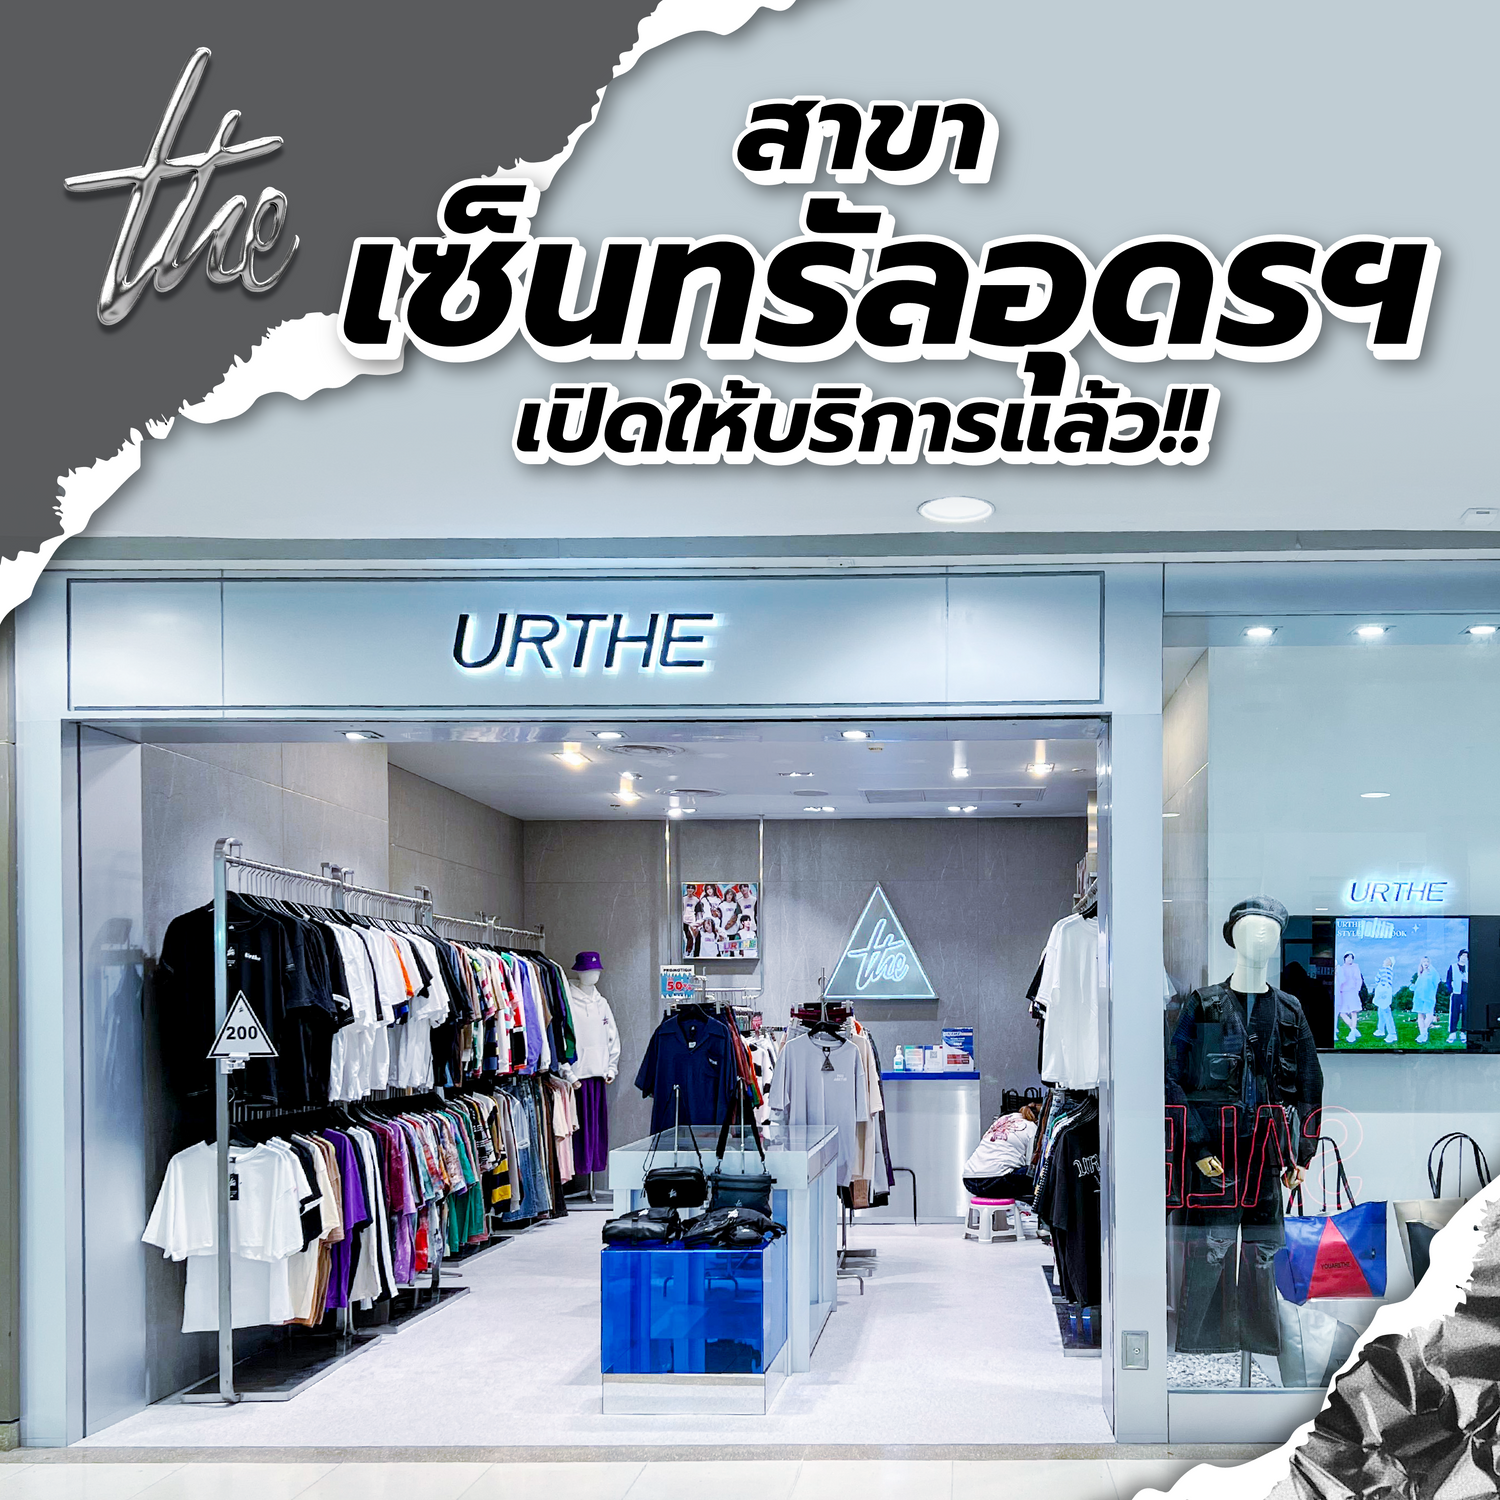 URTHE CENTRAL UDONTHANI